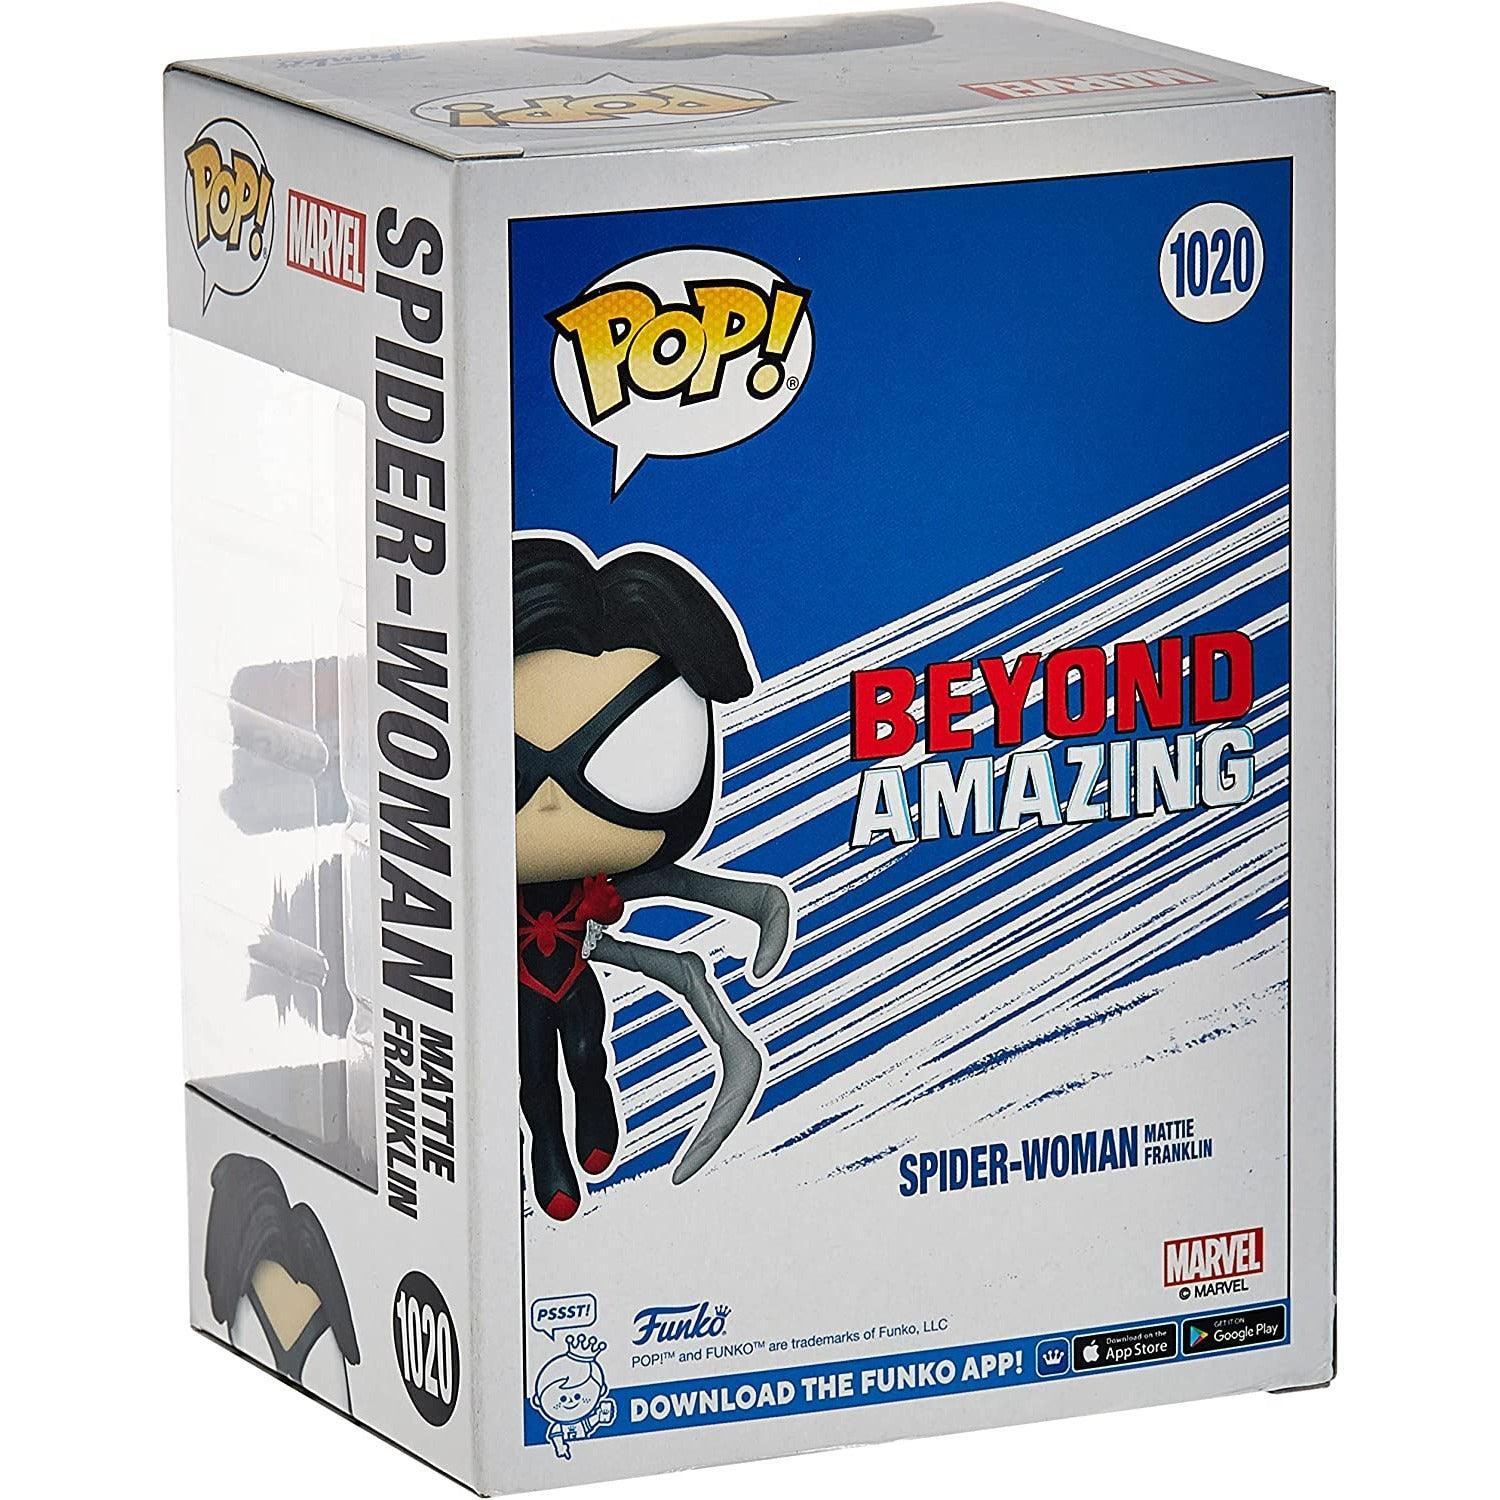 Funko Pop Marvel: Beyond Amazing - Spider-Woman Mattie Franklin - BumbleToys - 18+, 4+ Years, 5-7 Years, Action Figures, Avengers, Boys, Characters, Funko, Girls, Pre-Order